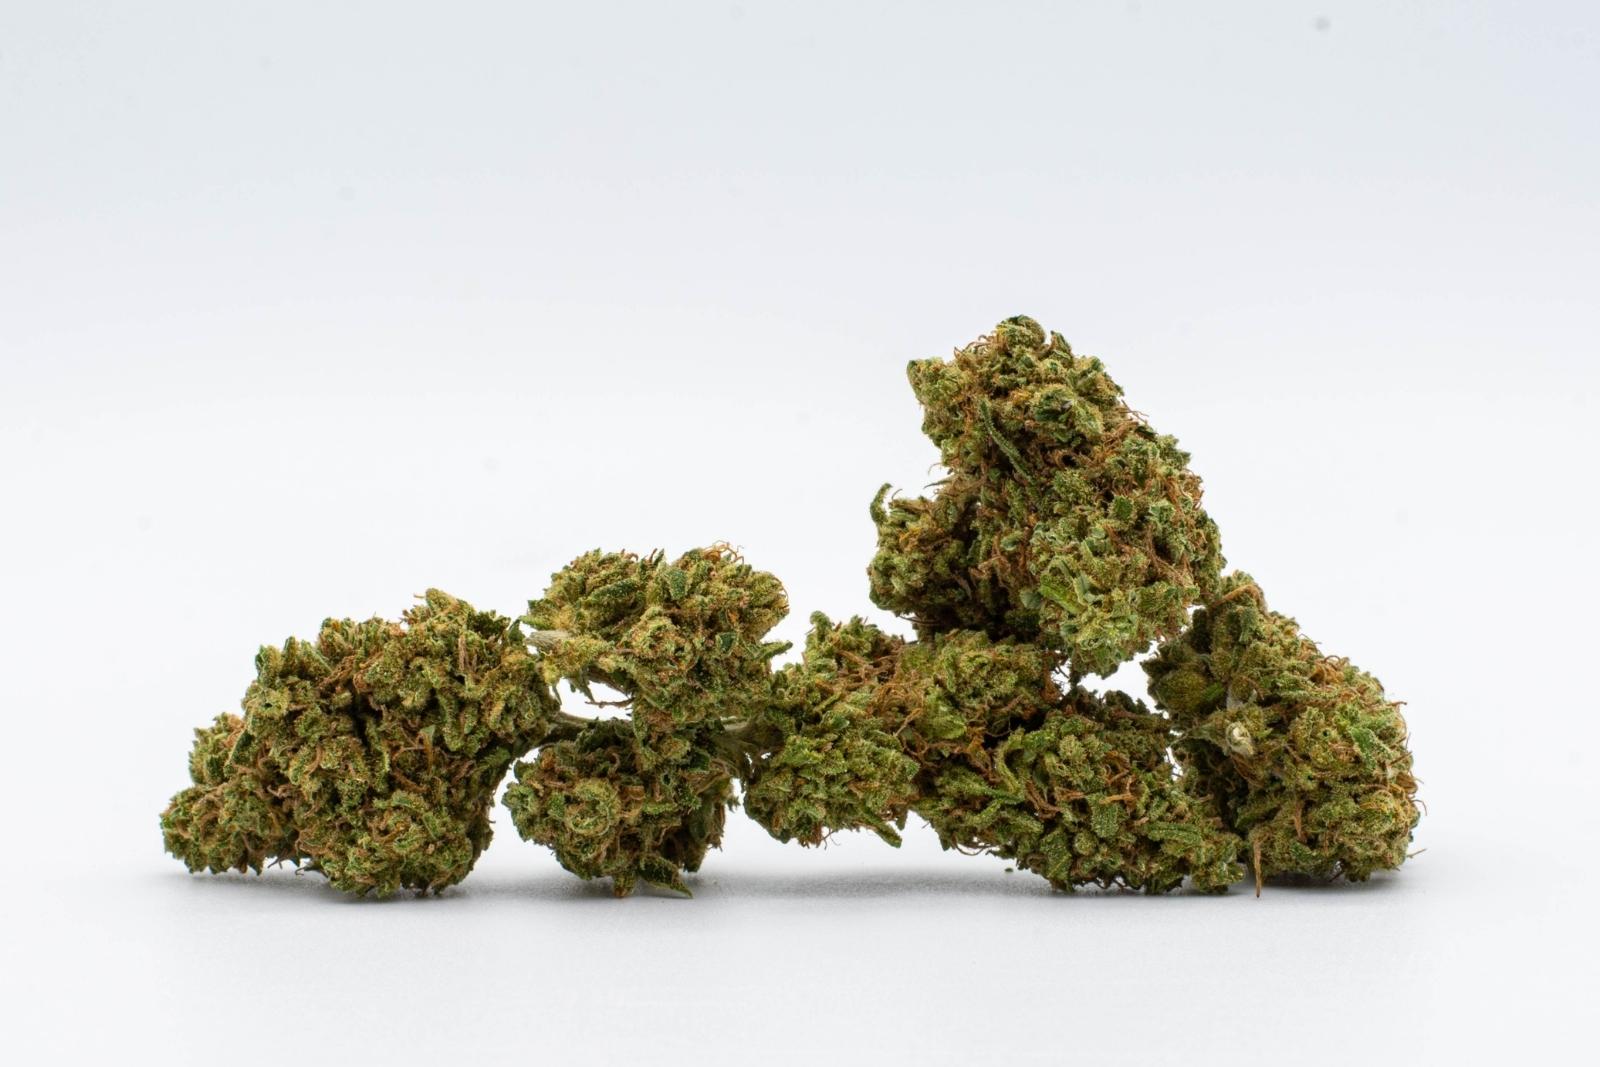 A pile of nugs of Cherry Crème Brulee hemp flower by Holy City Farms, on a white background